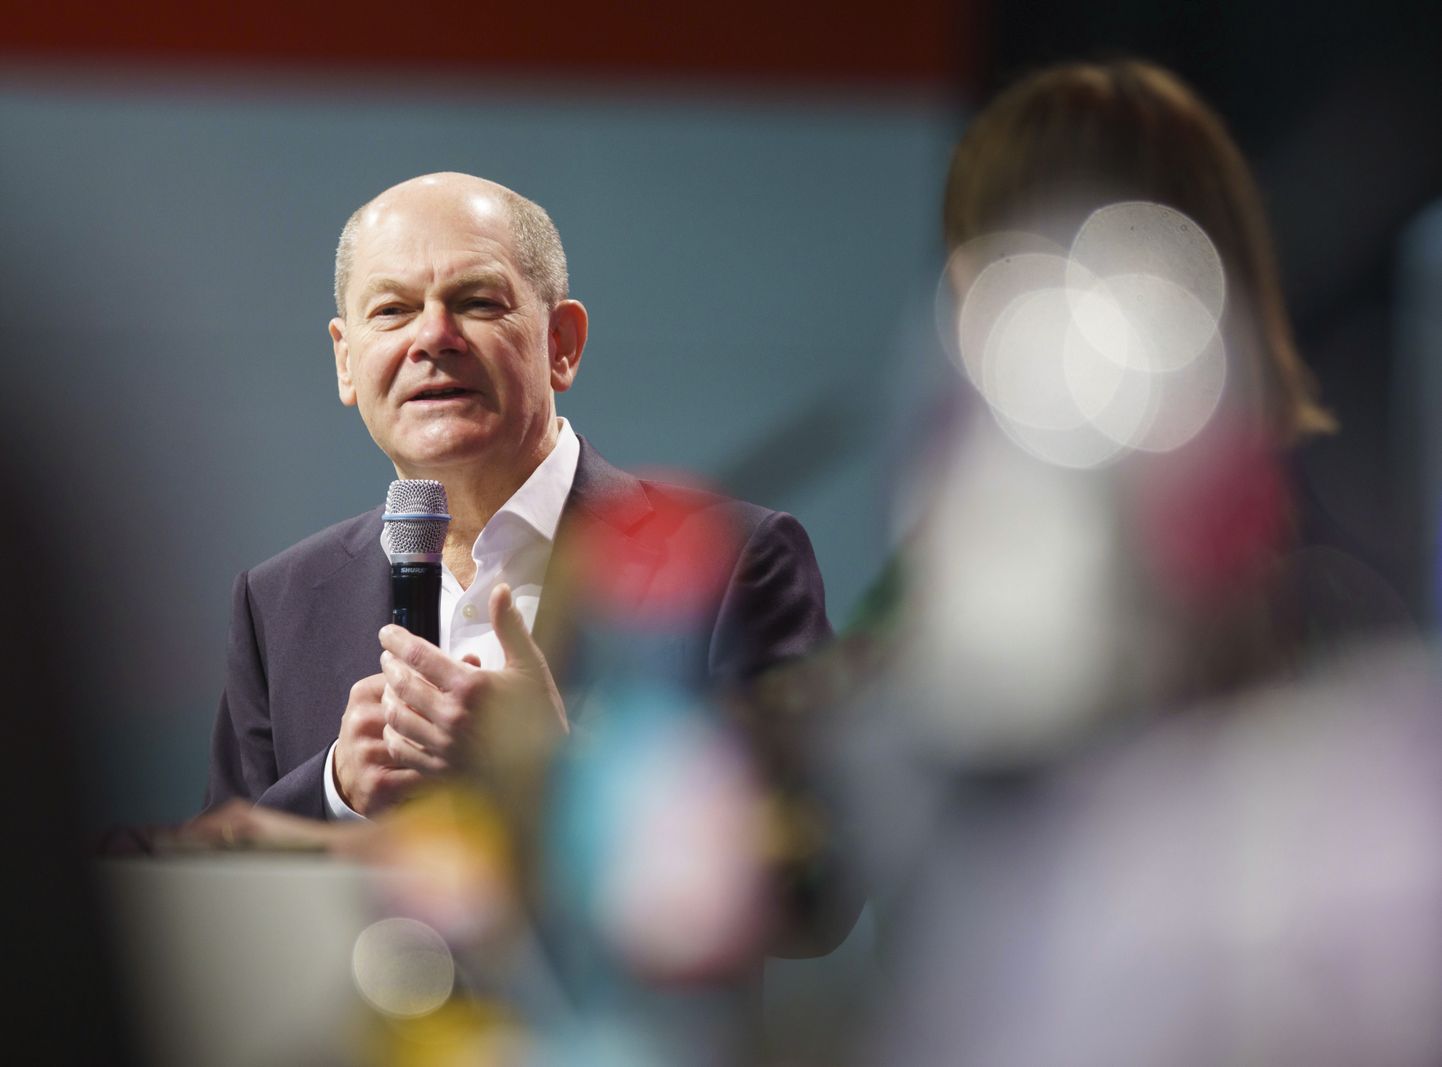 SPD candidate for chancellor Olaf Scholz speaks during the federal congress of the Jusos, in Frankfurt, Germany, Saturday, Nov. 27, 2021.  (Frank Rumpenhorst/dpa via AP)